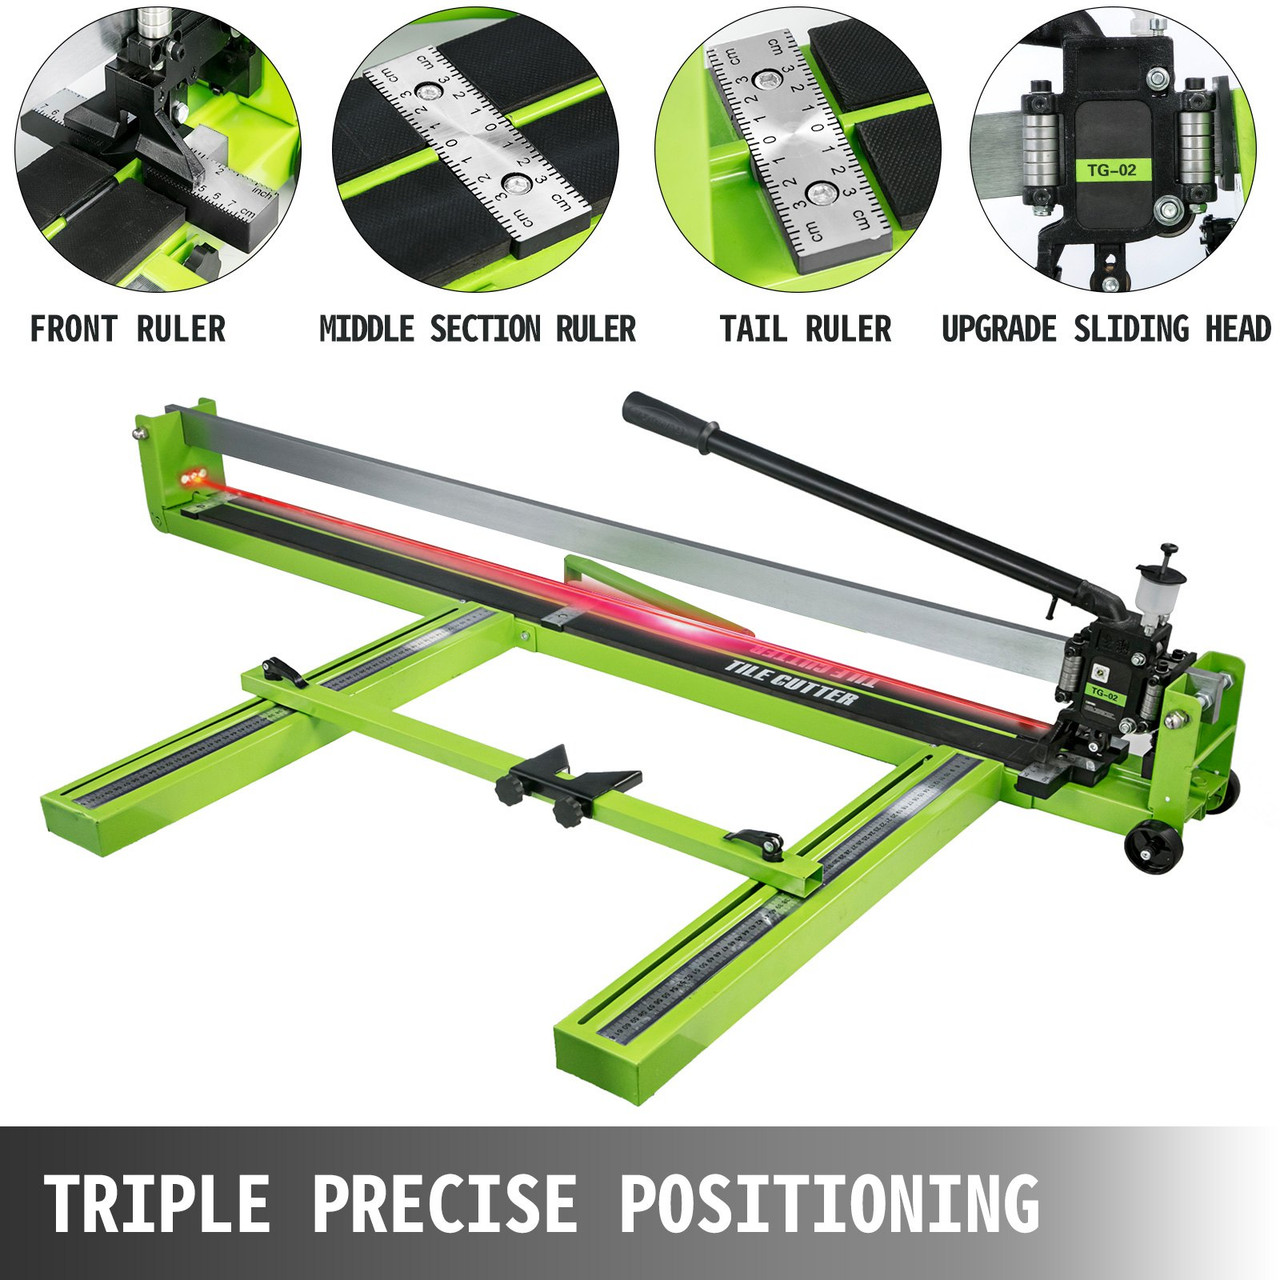 Tile Cutter 35.4 Inch, Manual Tile Cutter All-Steel Frame,Tile Cutting Machine w/Laser Guide and Bonus Spare Cutter,Tile Cutter Hand Tool for Precision Cutting Porcelain Ceramic Floor Tiles